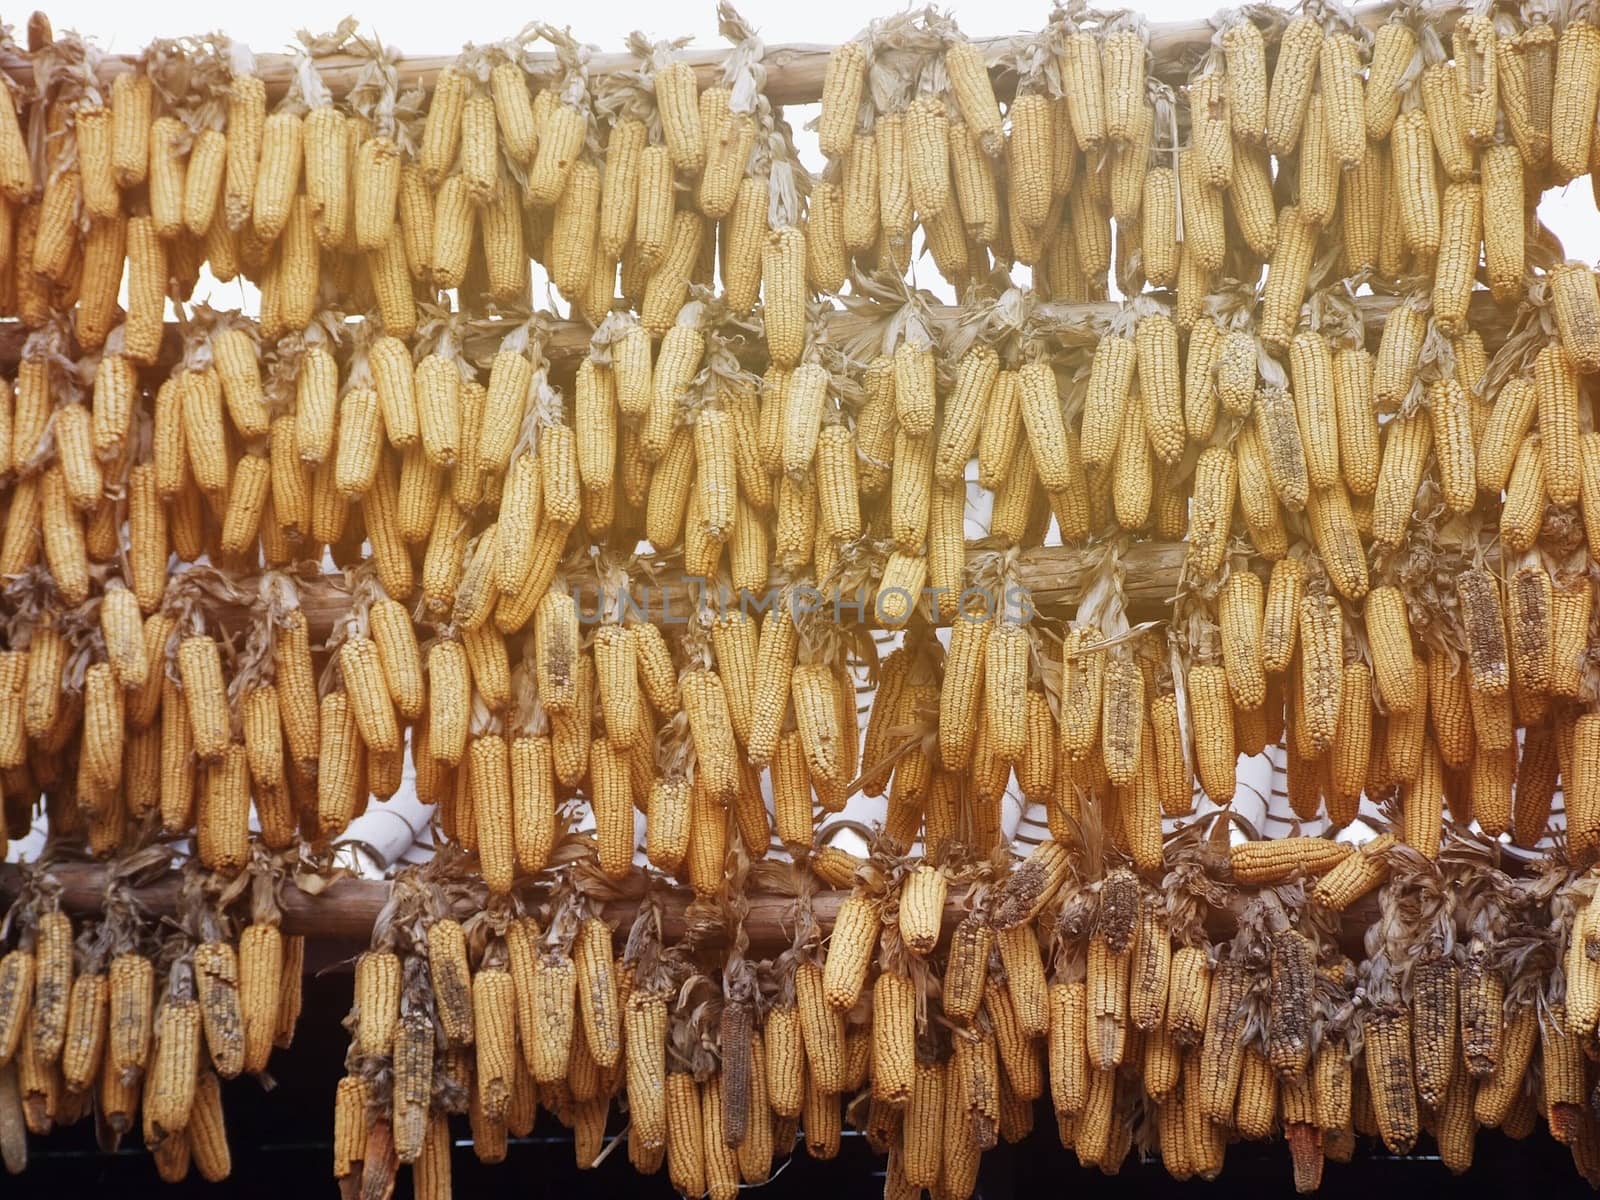 Agriculture concept : A lot of ripe dried corn cobs hanging on bamboo bar in the autumn sun